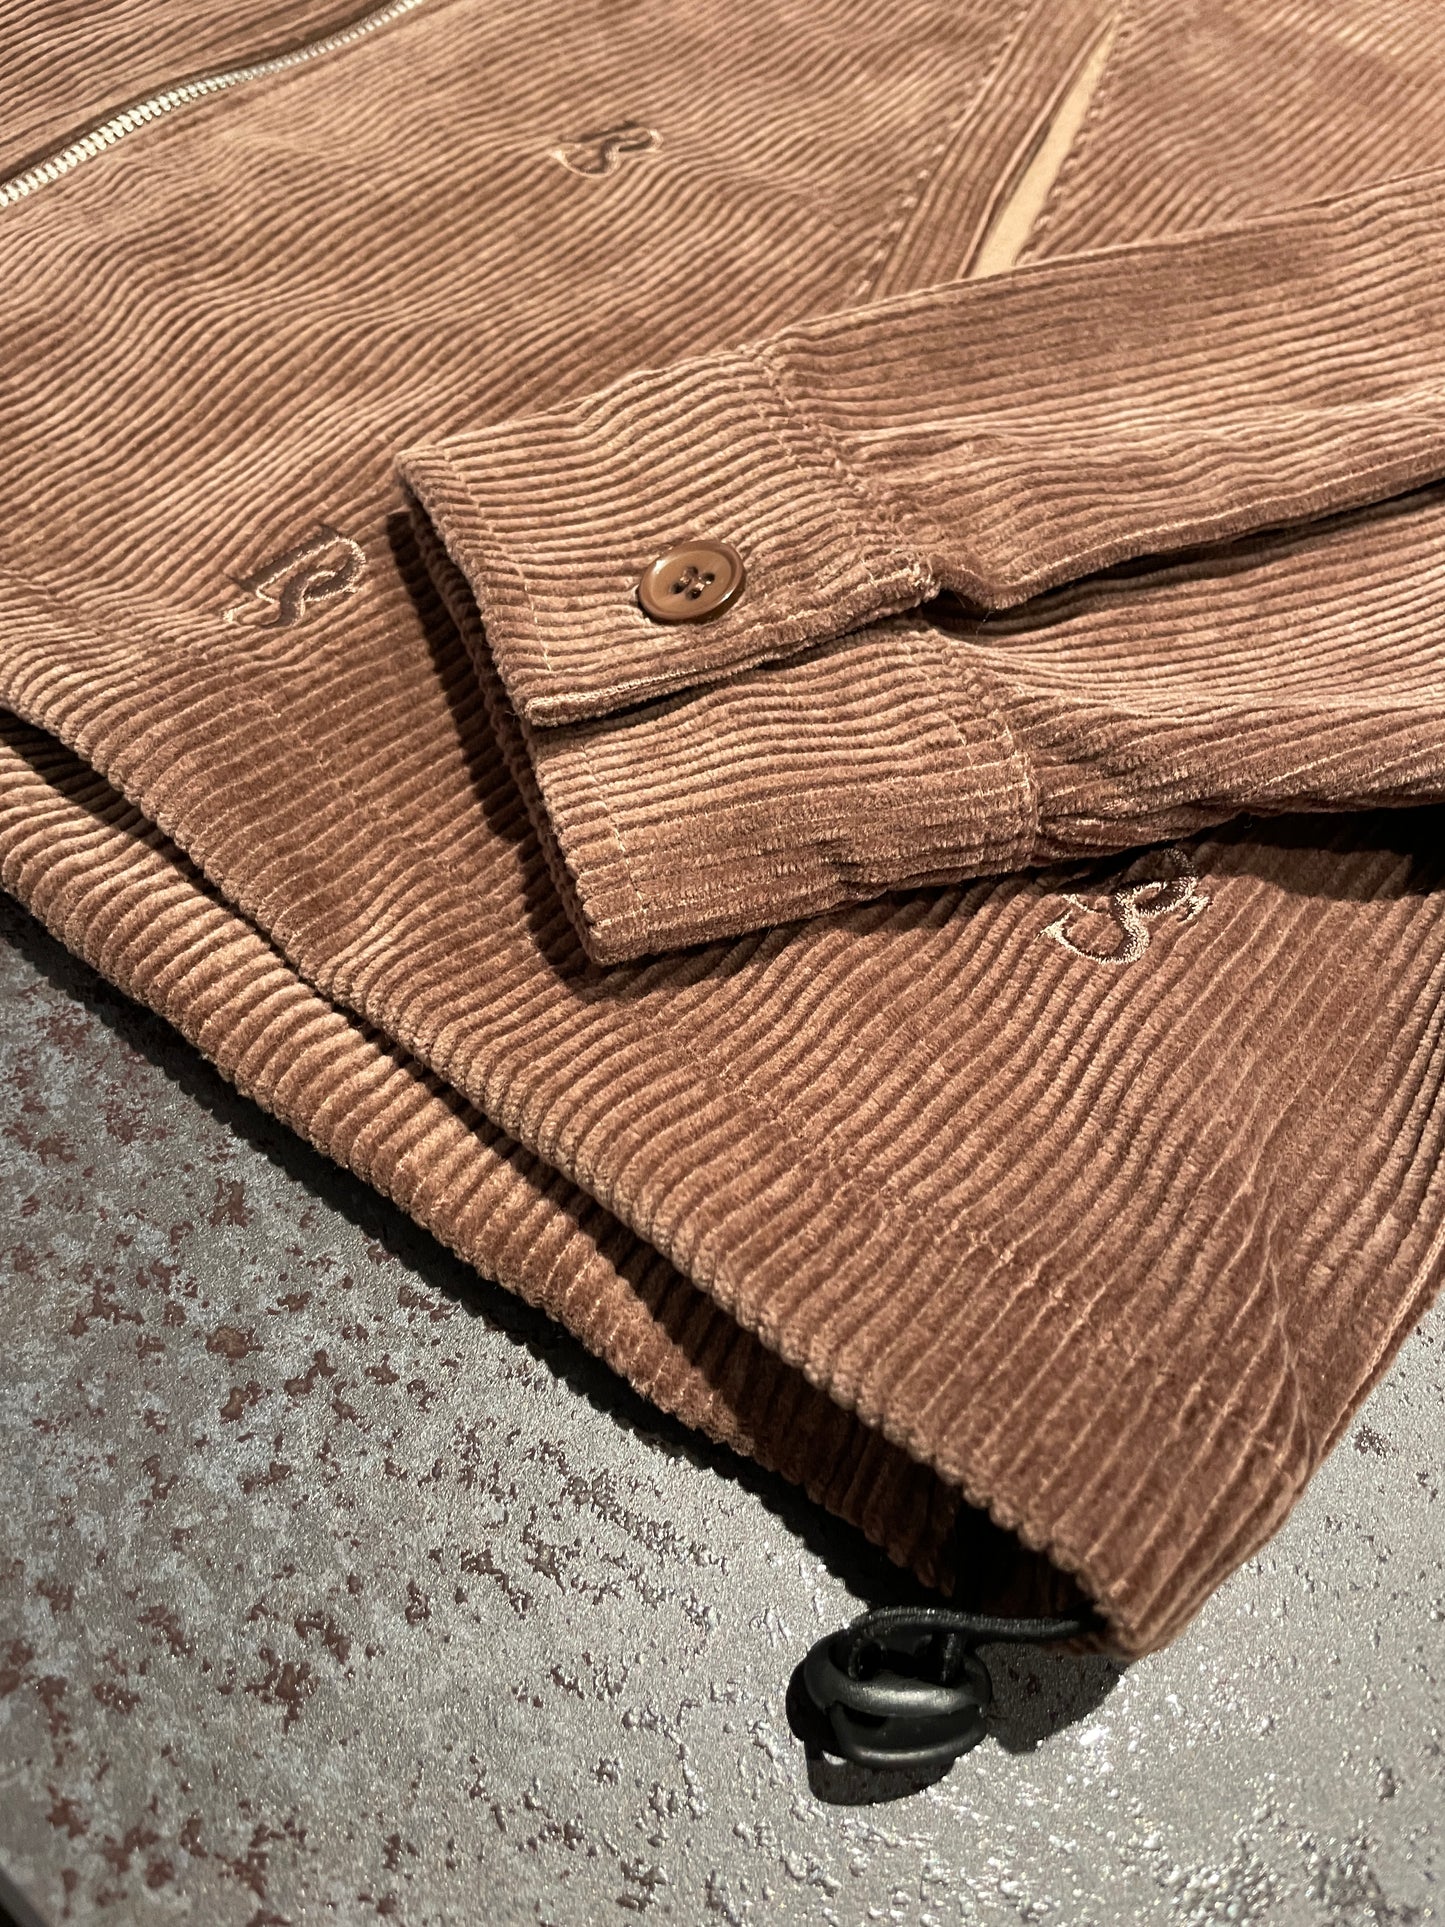 Brown Corduroy Jacket ''DS Overall Embroideries''